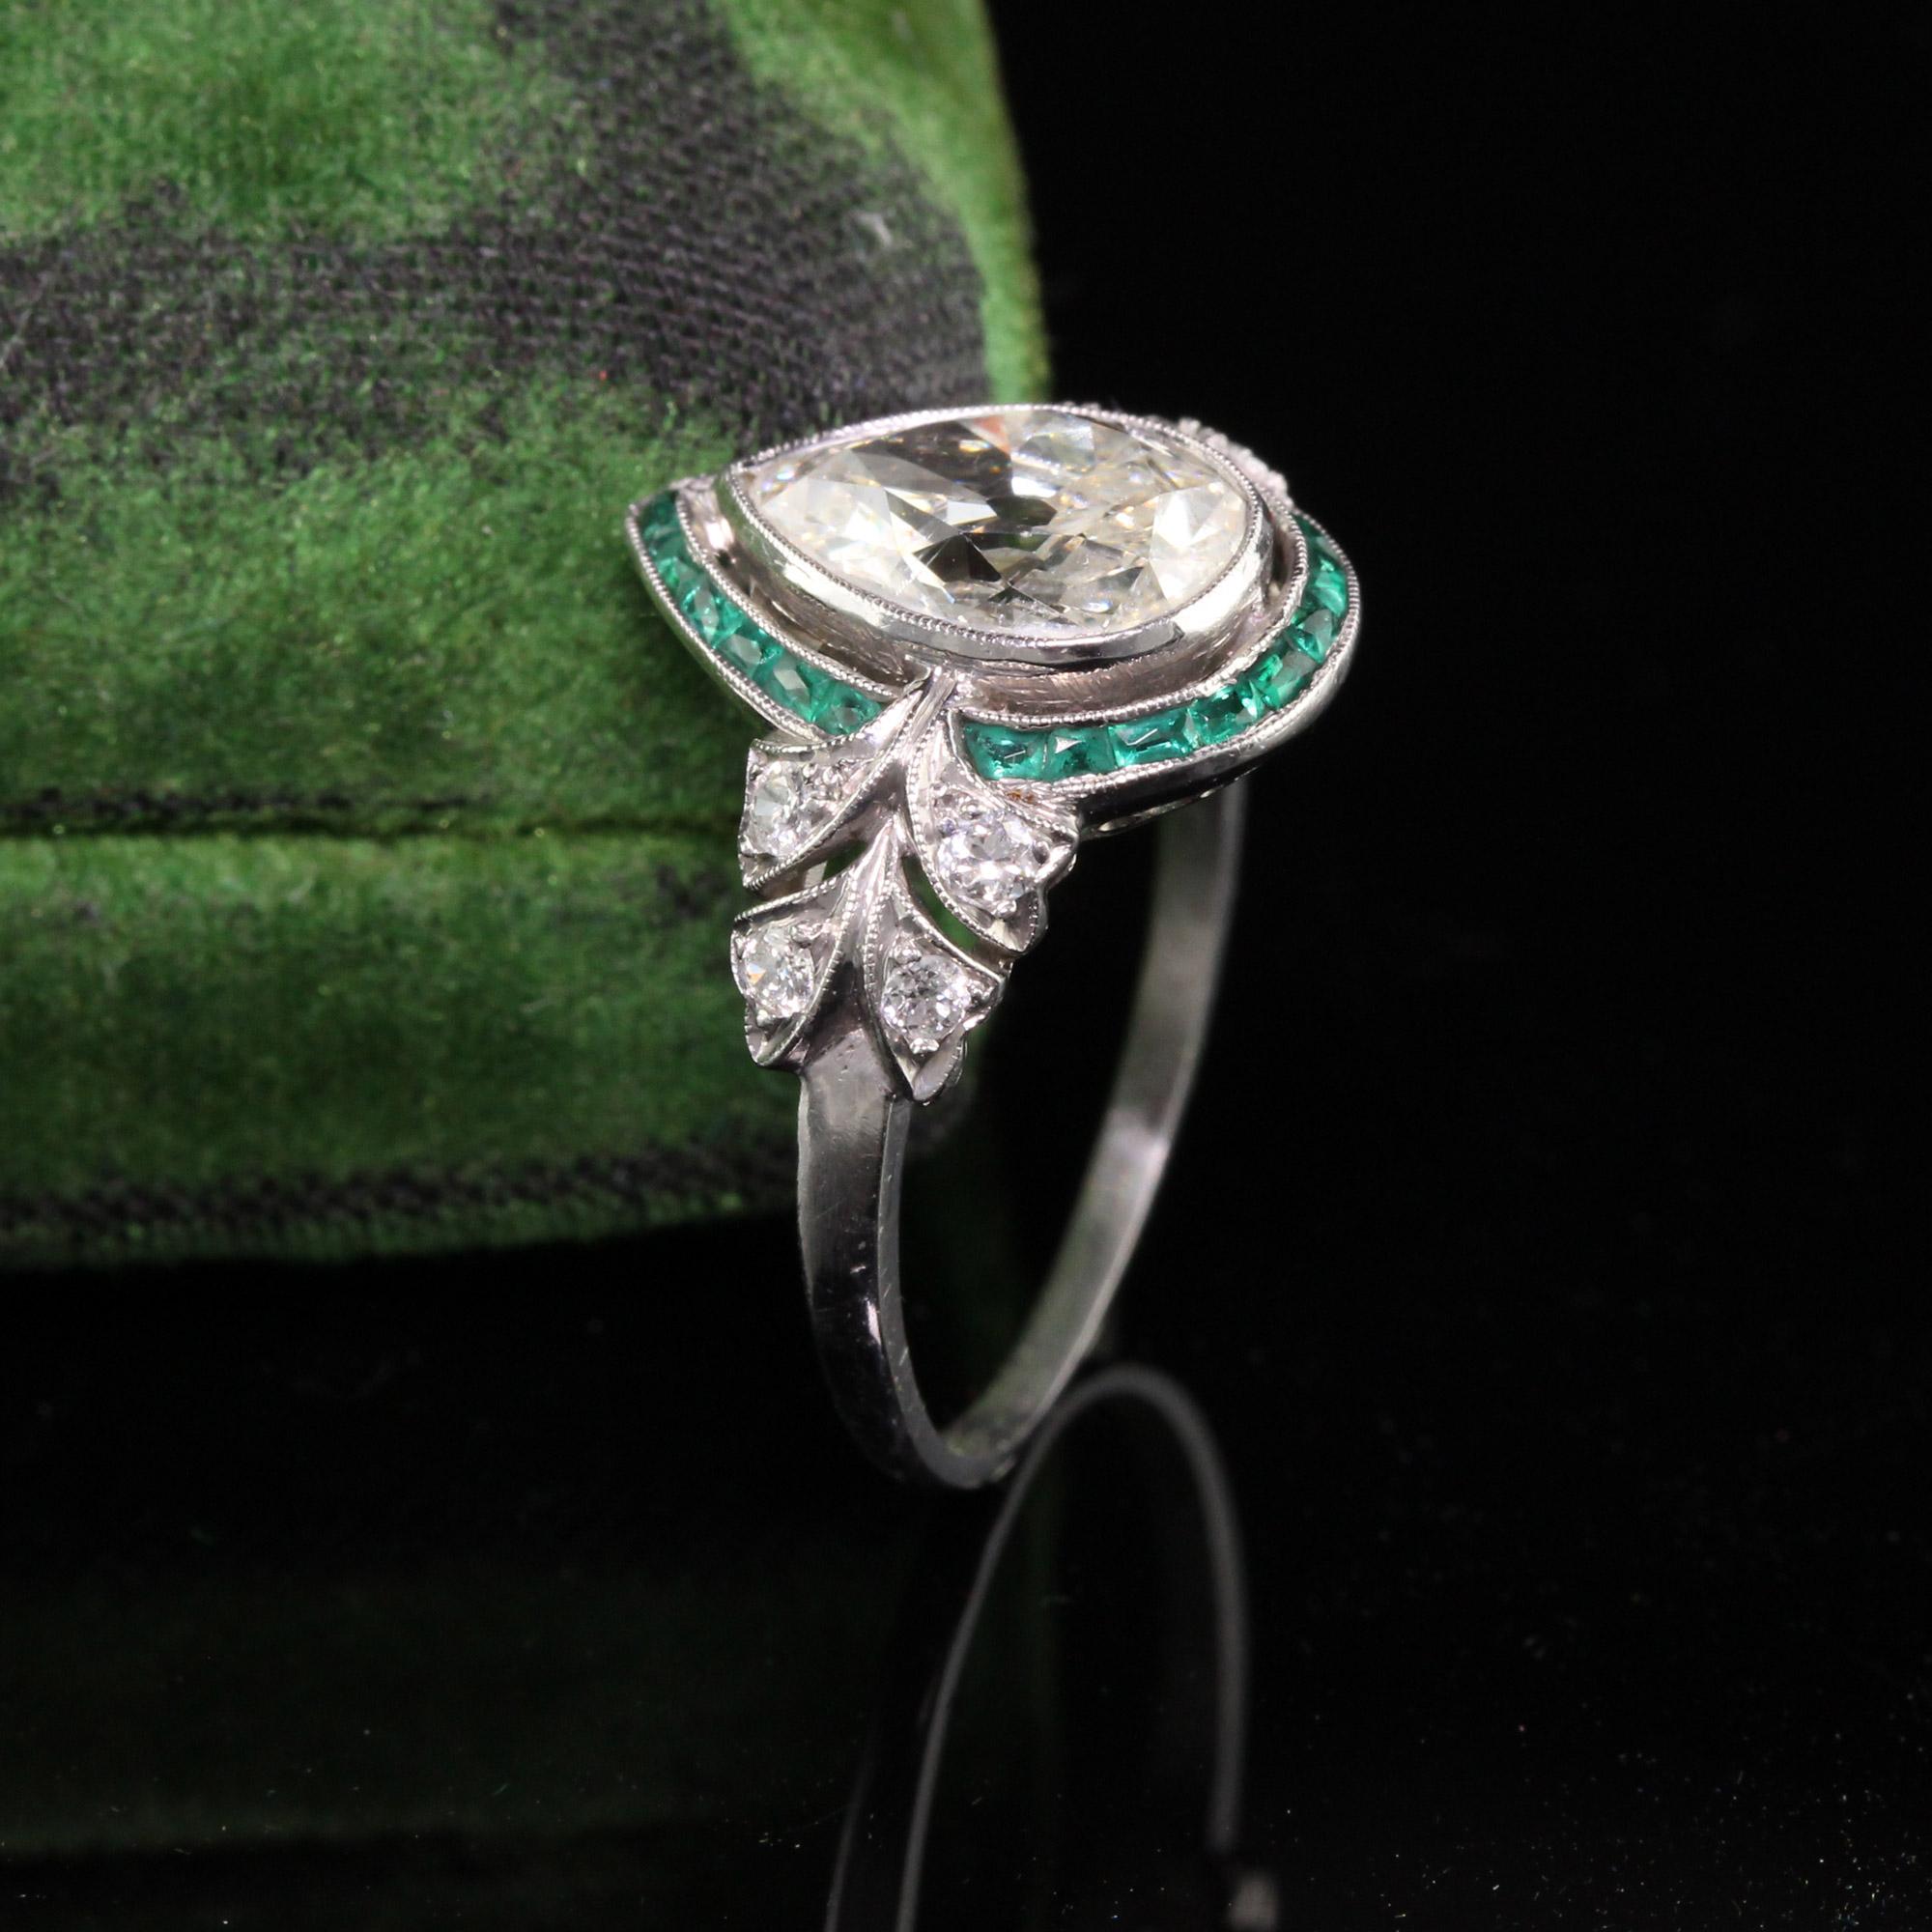 Beautiful Antique Art Deco Platinum Old Pear Shape Diamond Emerald Halo Engagement Ring. This unbelievable engagement ring features an old pear shape diamond in the center surrounded by emeralds and delicate flower sides. The center is approximately